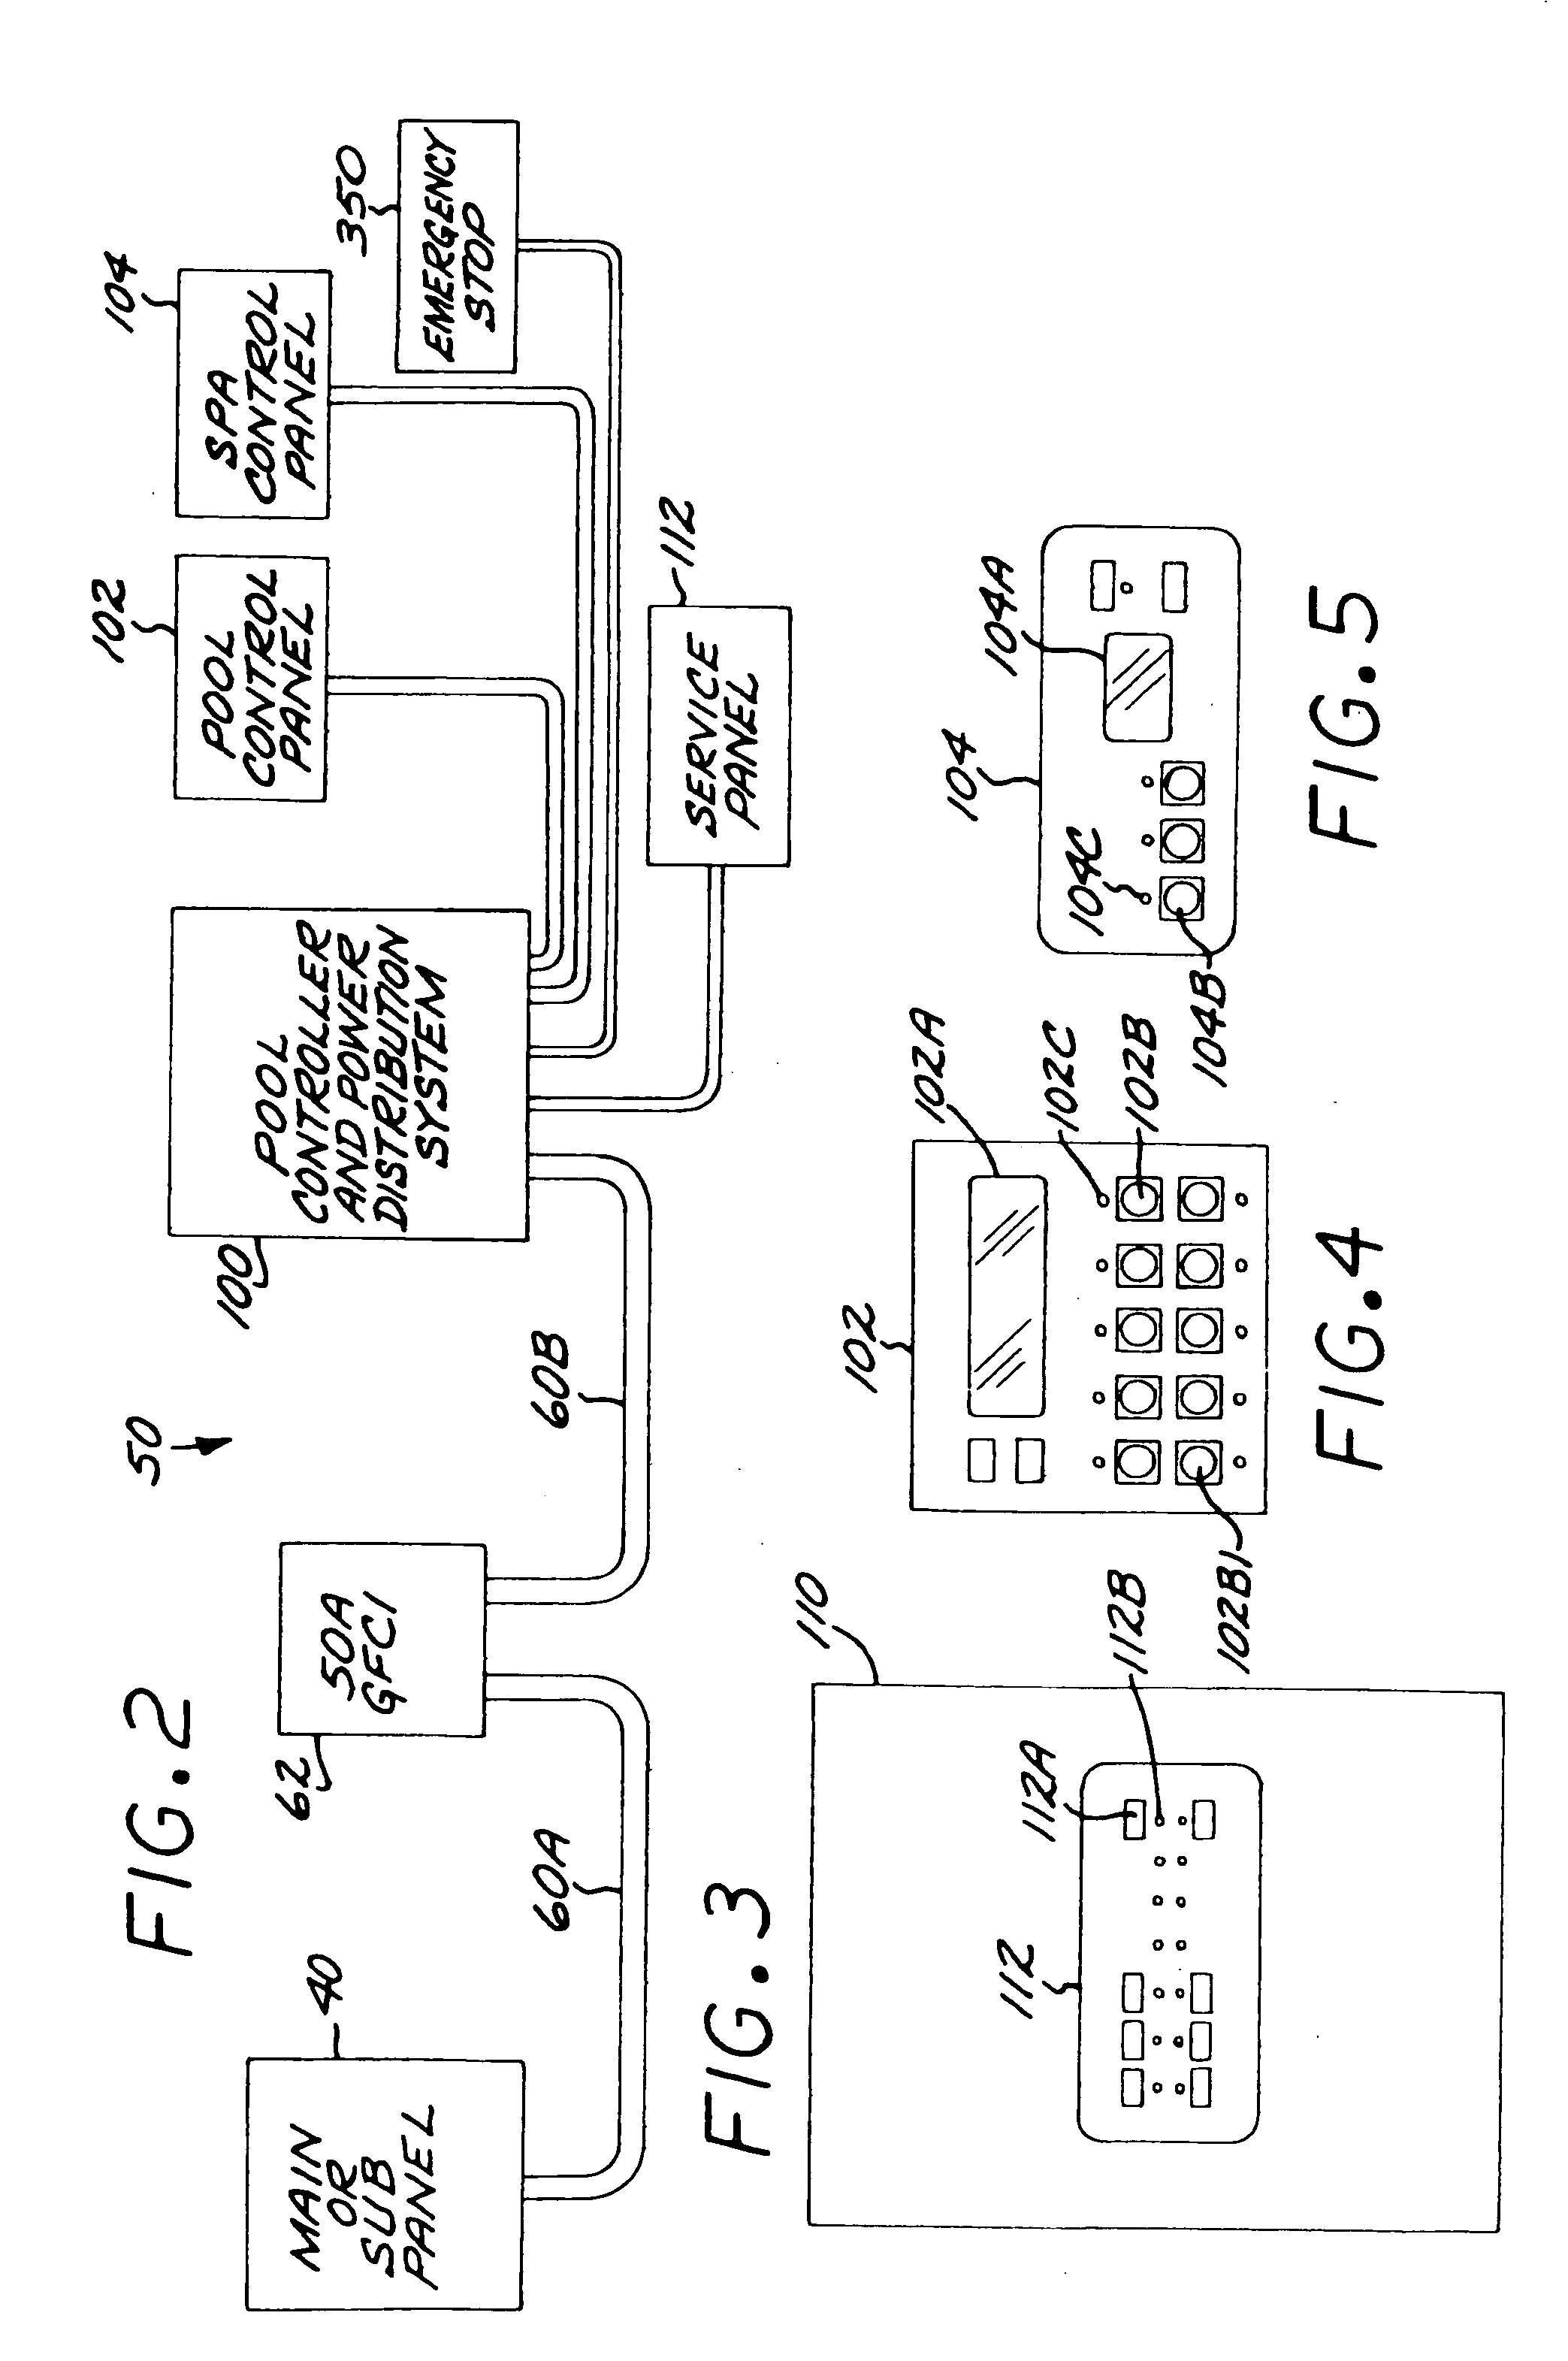 Controller system for pool and/or spa